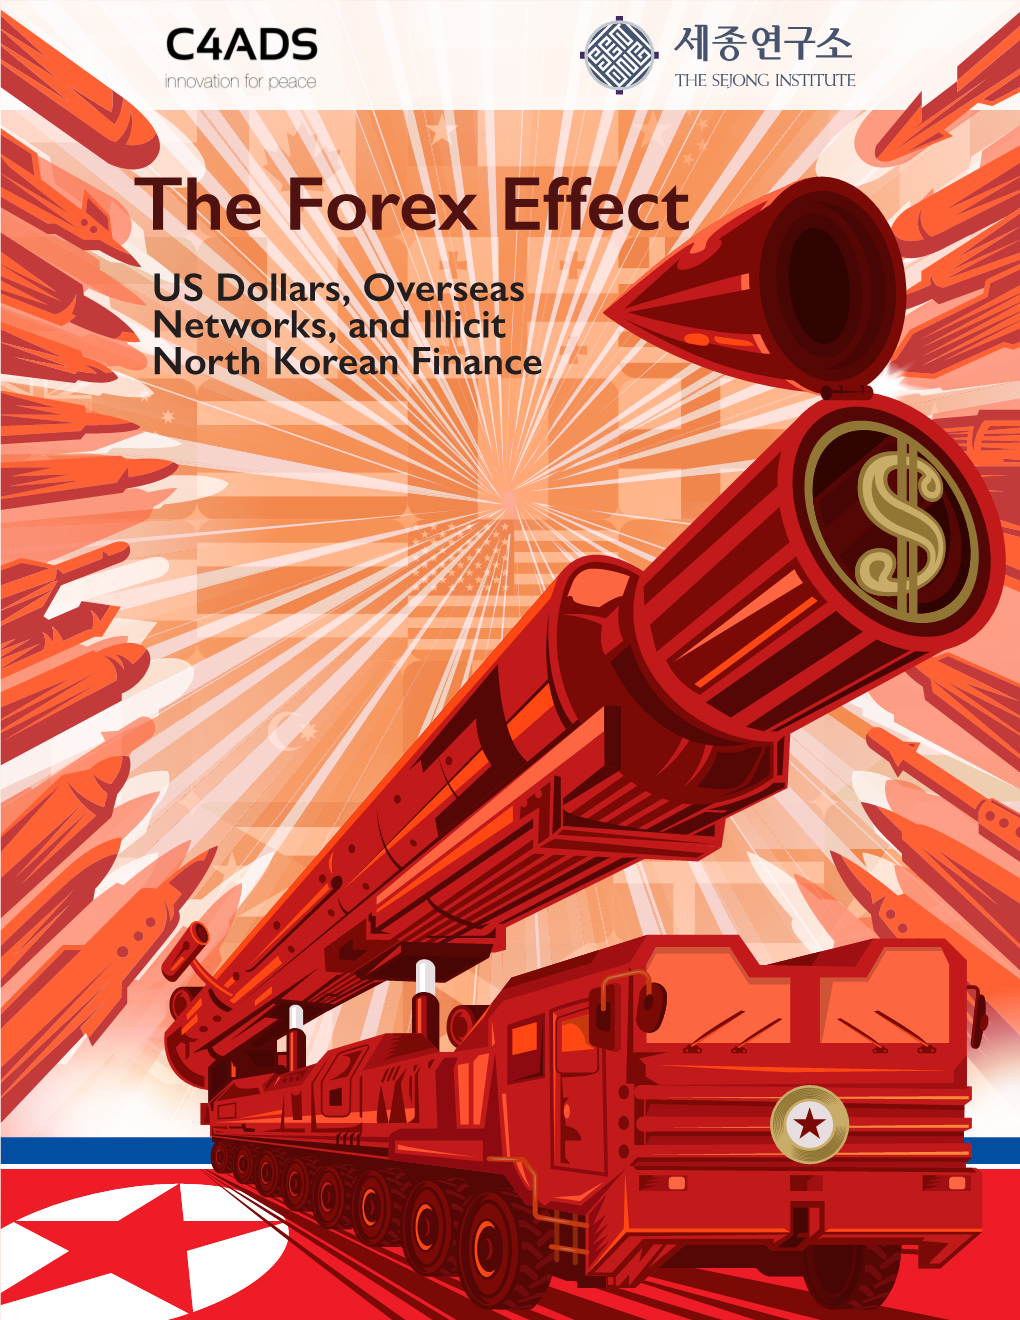 The Forex Effect US Dollars, Overseas Networks, and Illicit North Korean Finance the Forex Effect